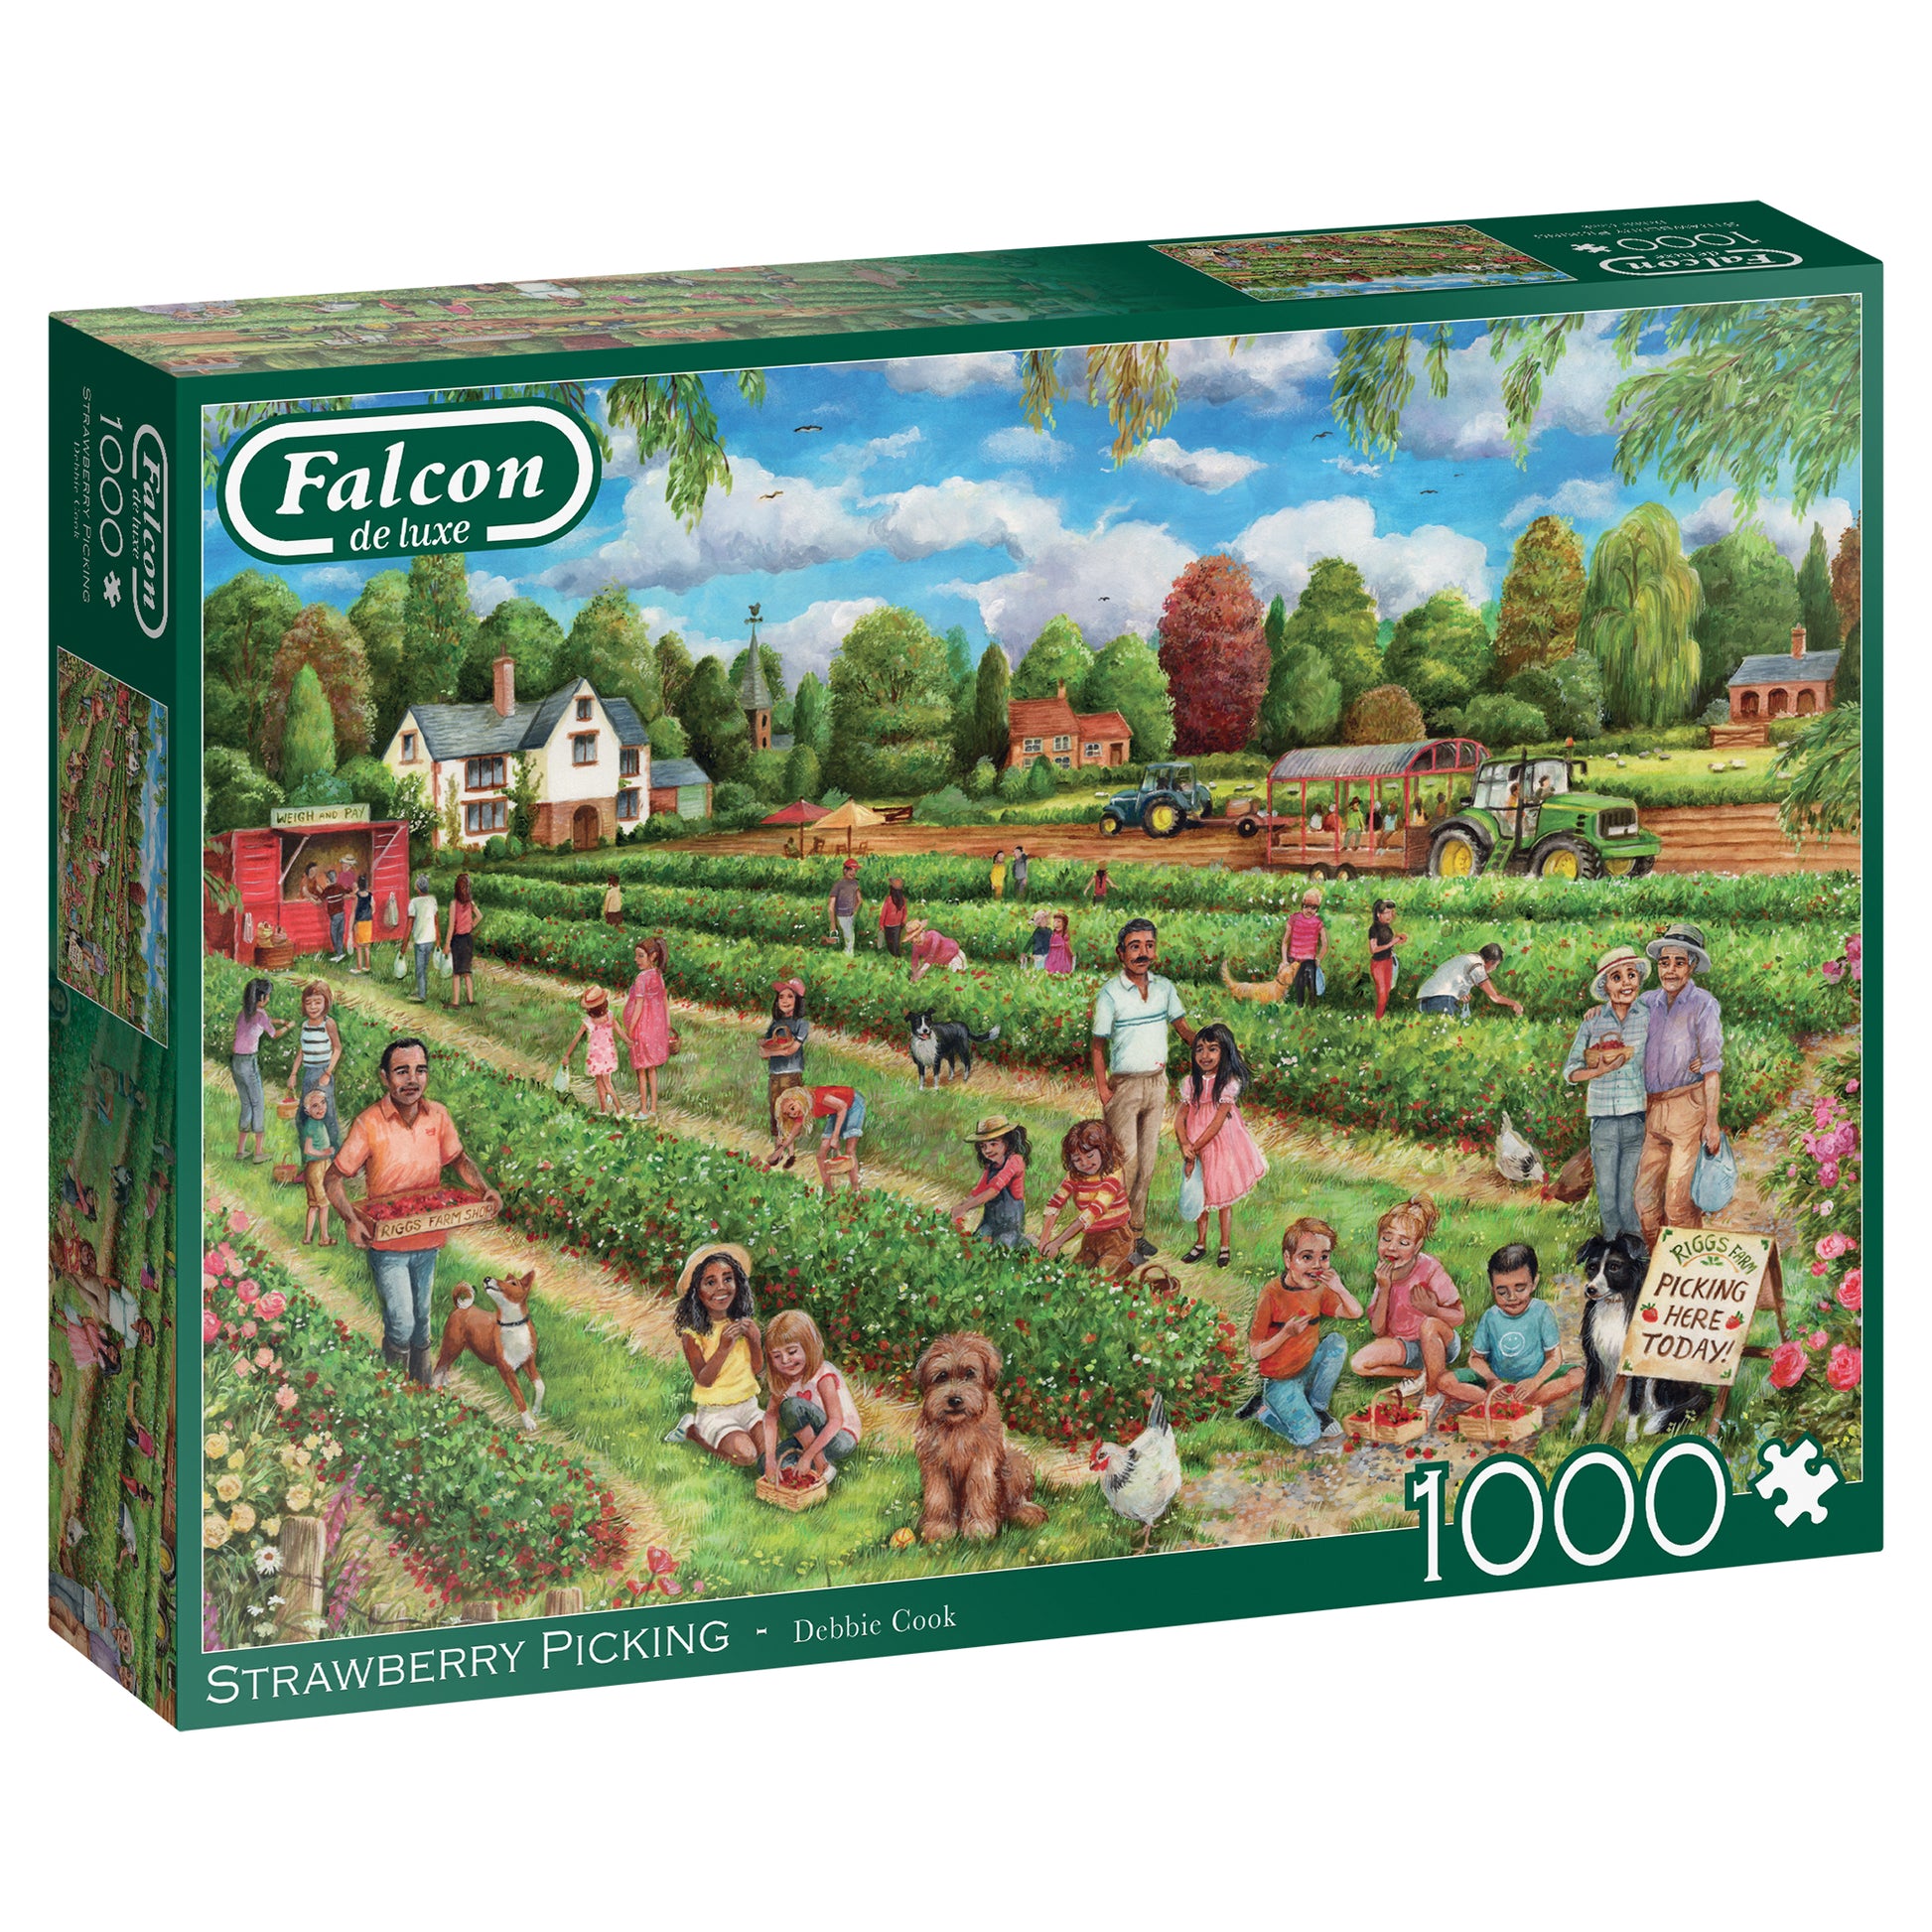 Falcon - Strawberry Picking (1000 pieces) - product image - Jumboplay.com